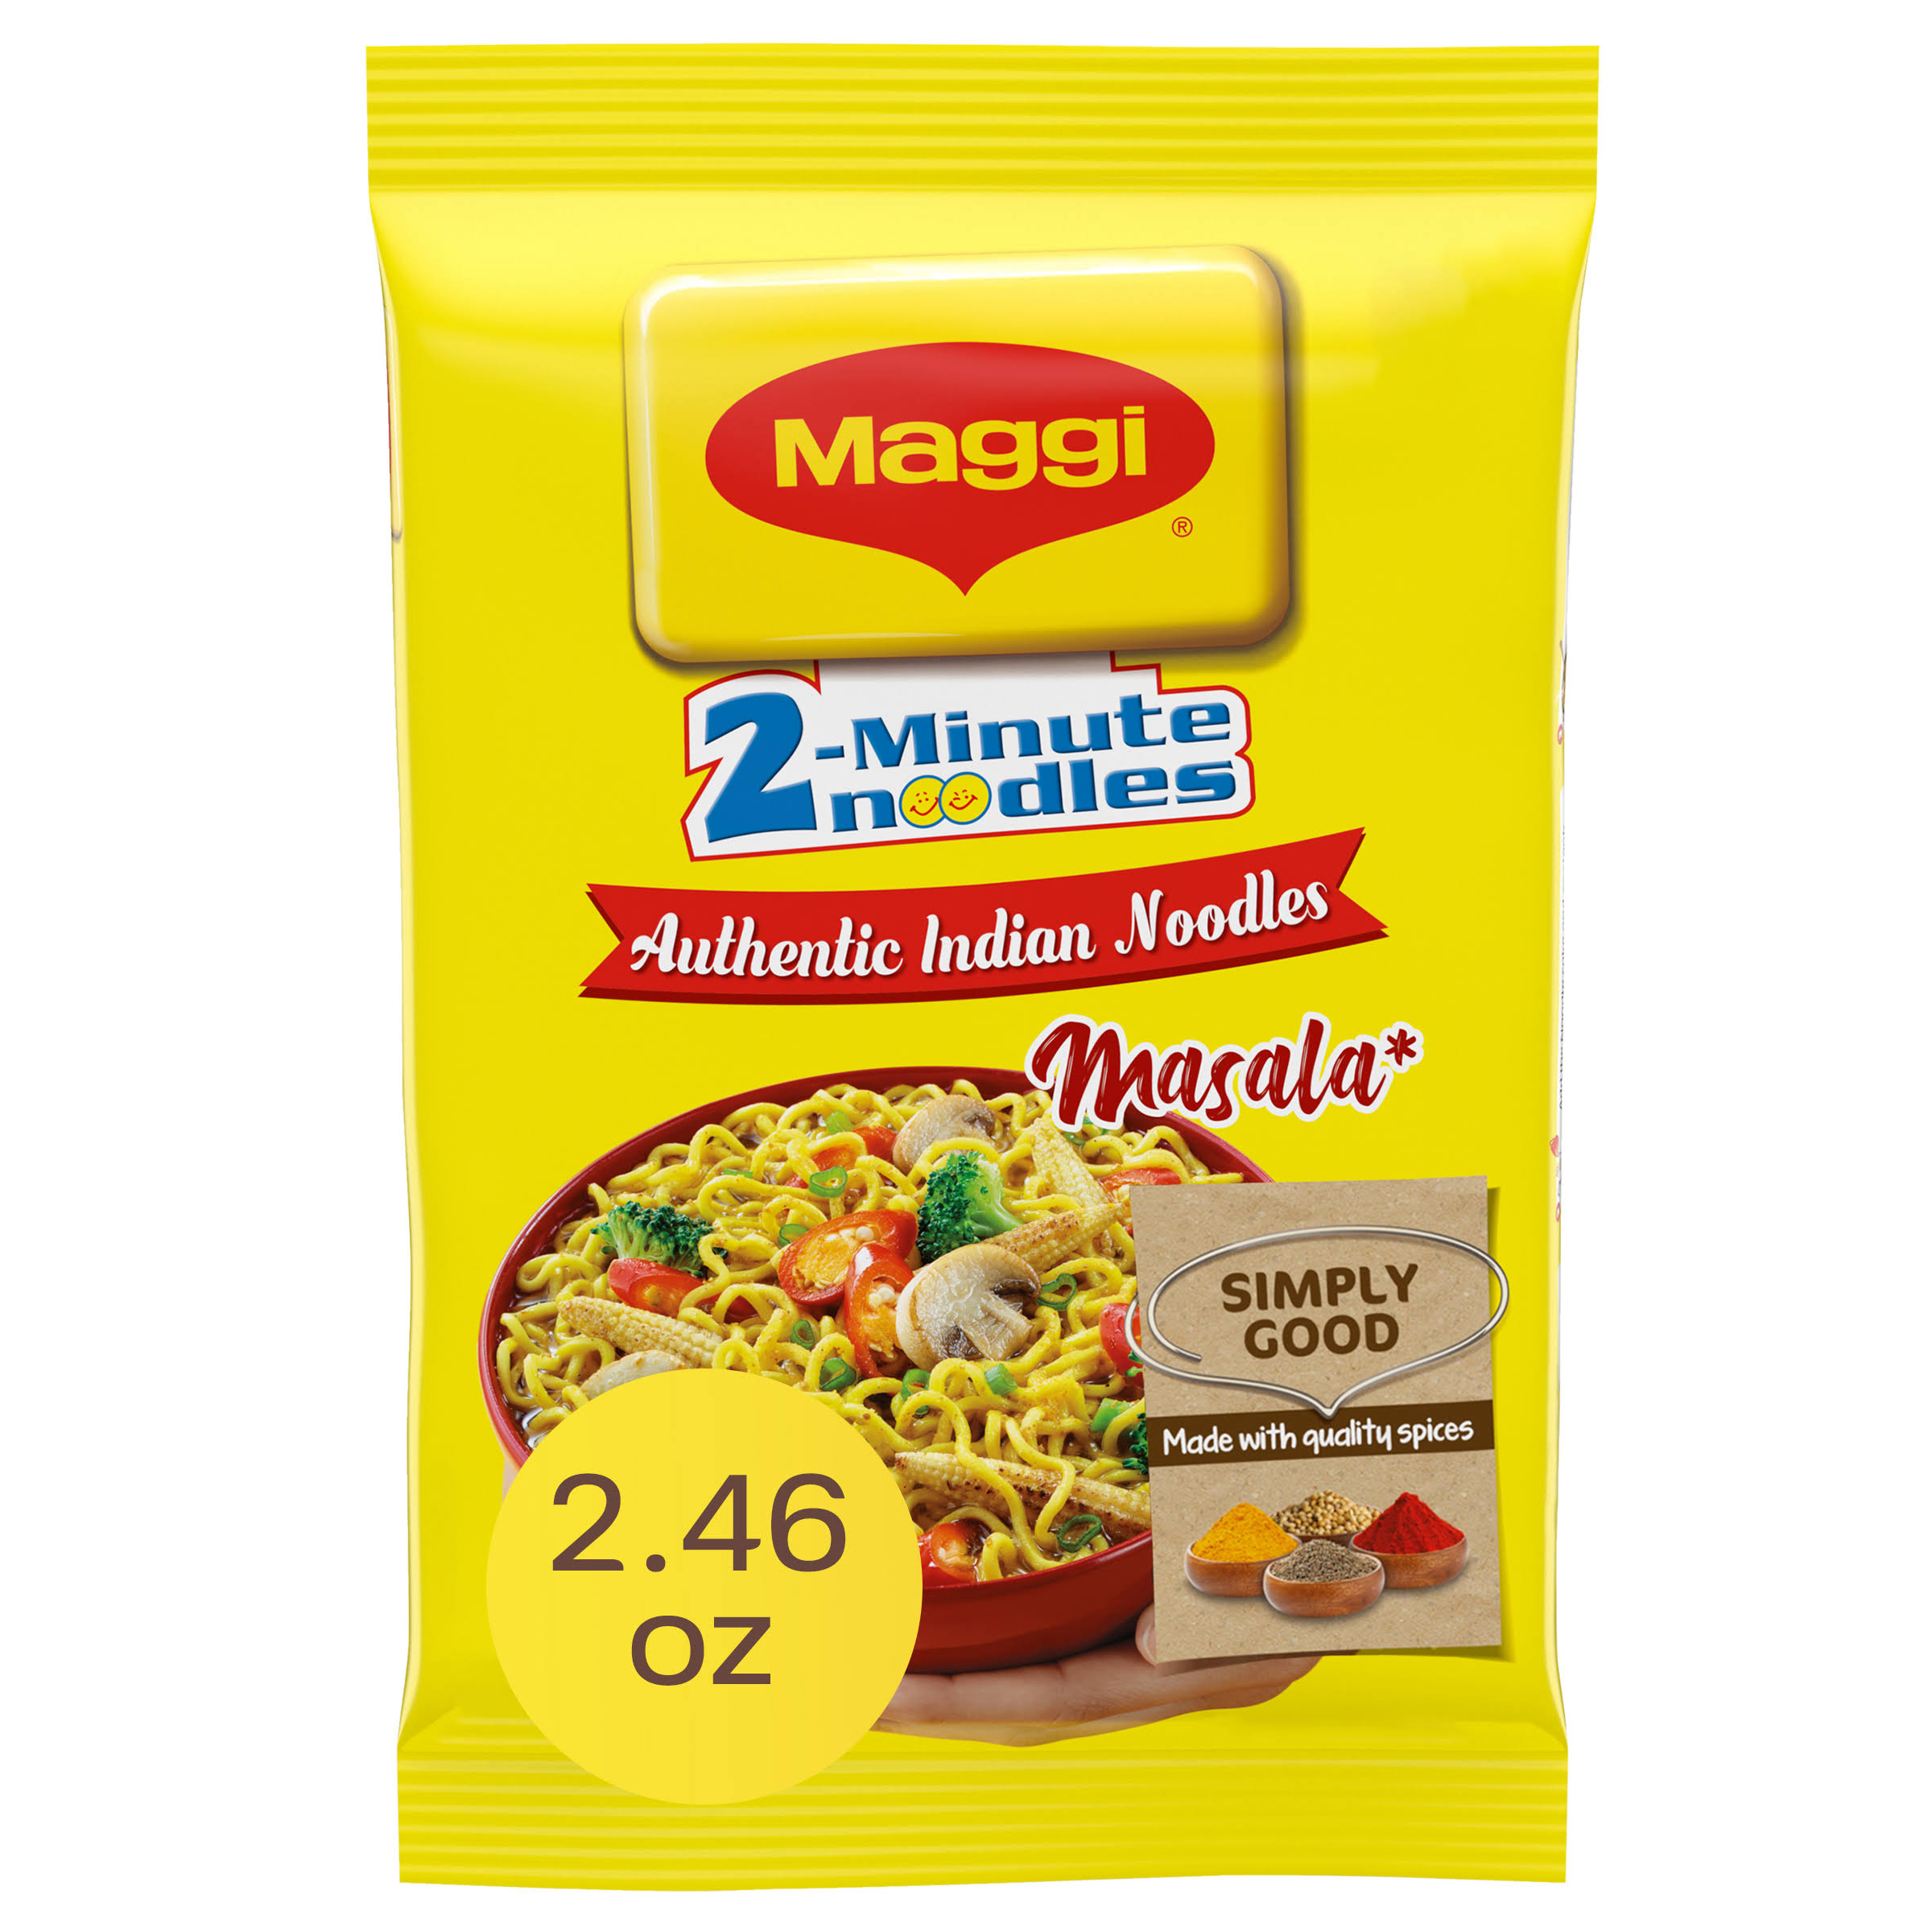 Maggi Masala 2-minute Noodles India Snack - Pack Of 3